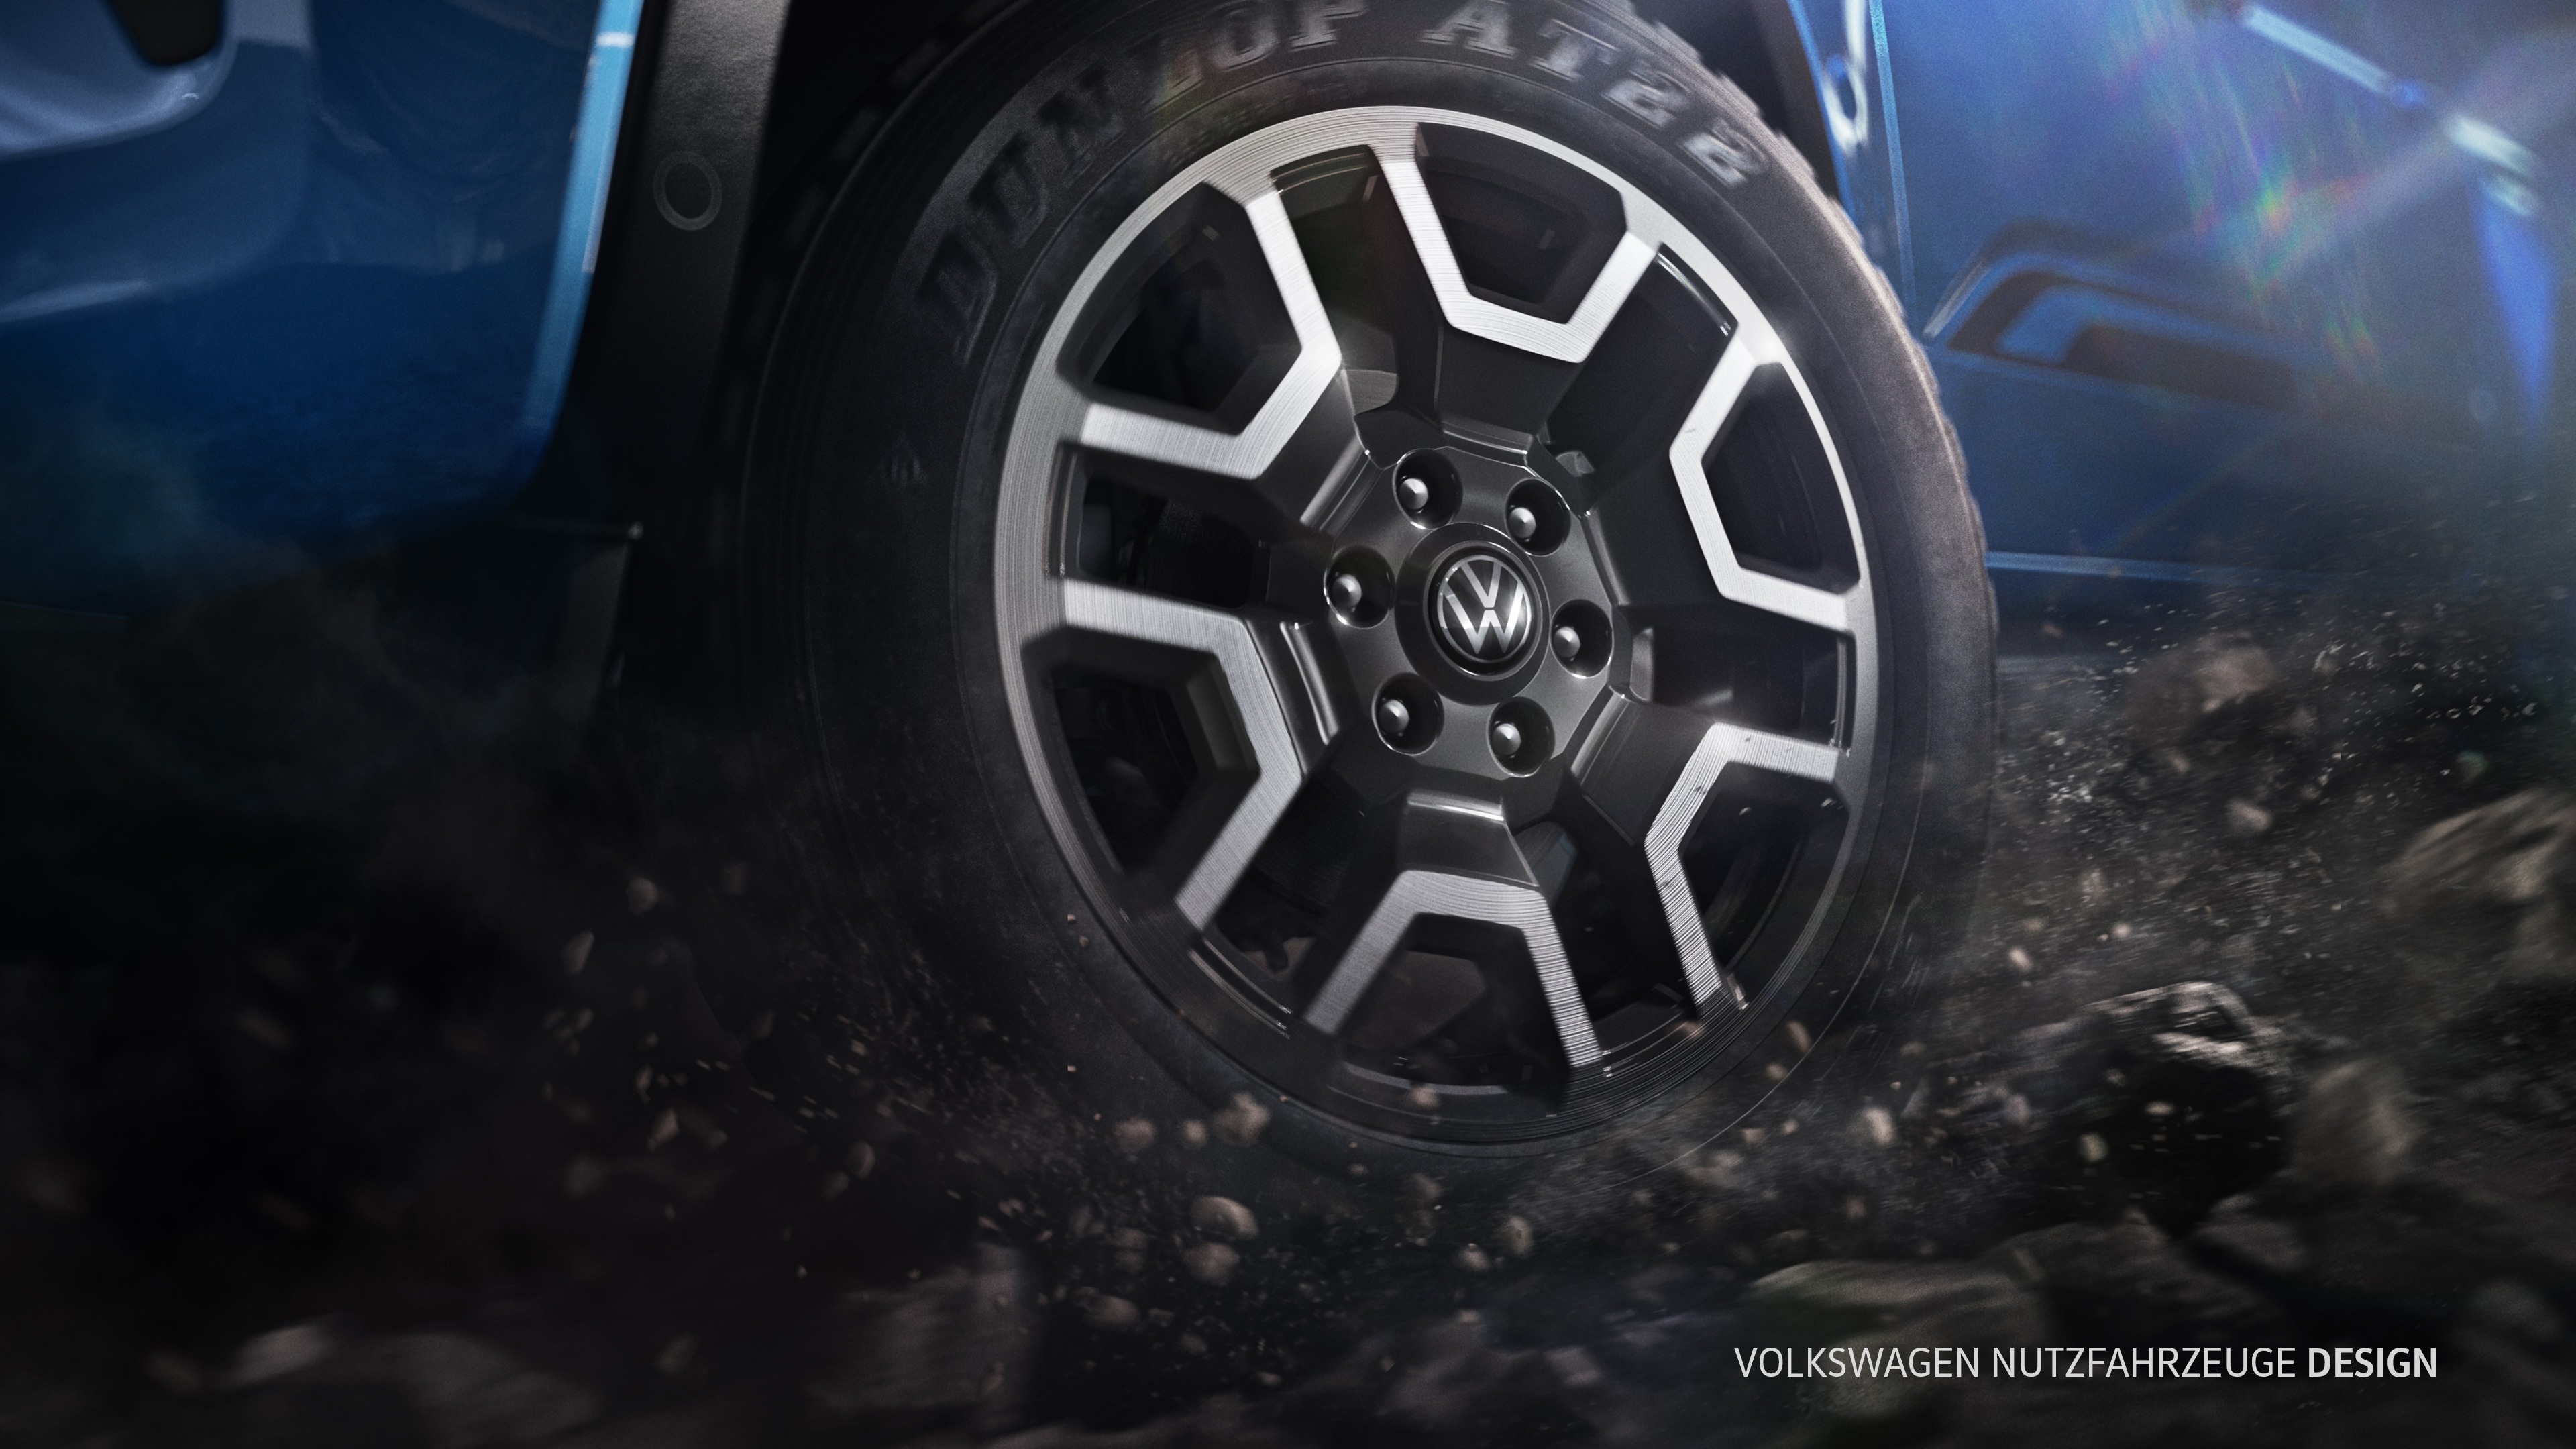 The new VW Amarok to premiere on 7th July